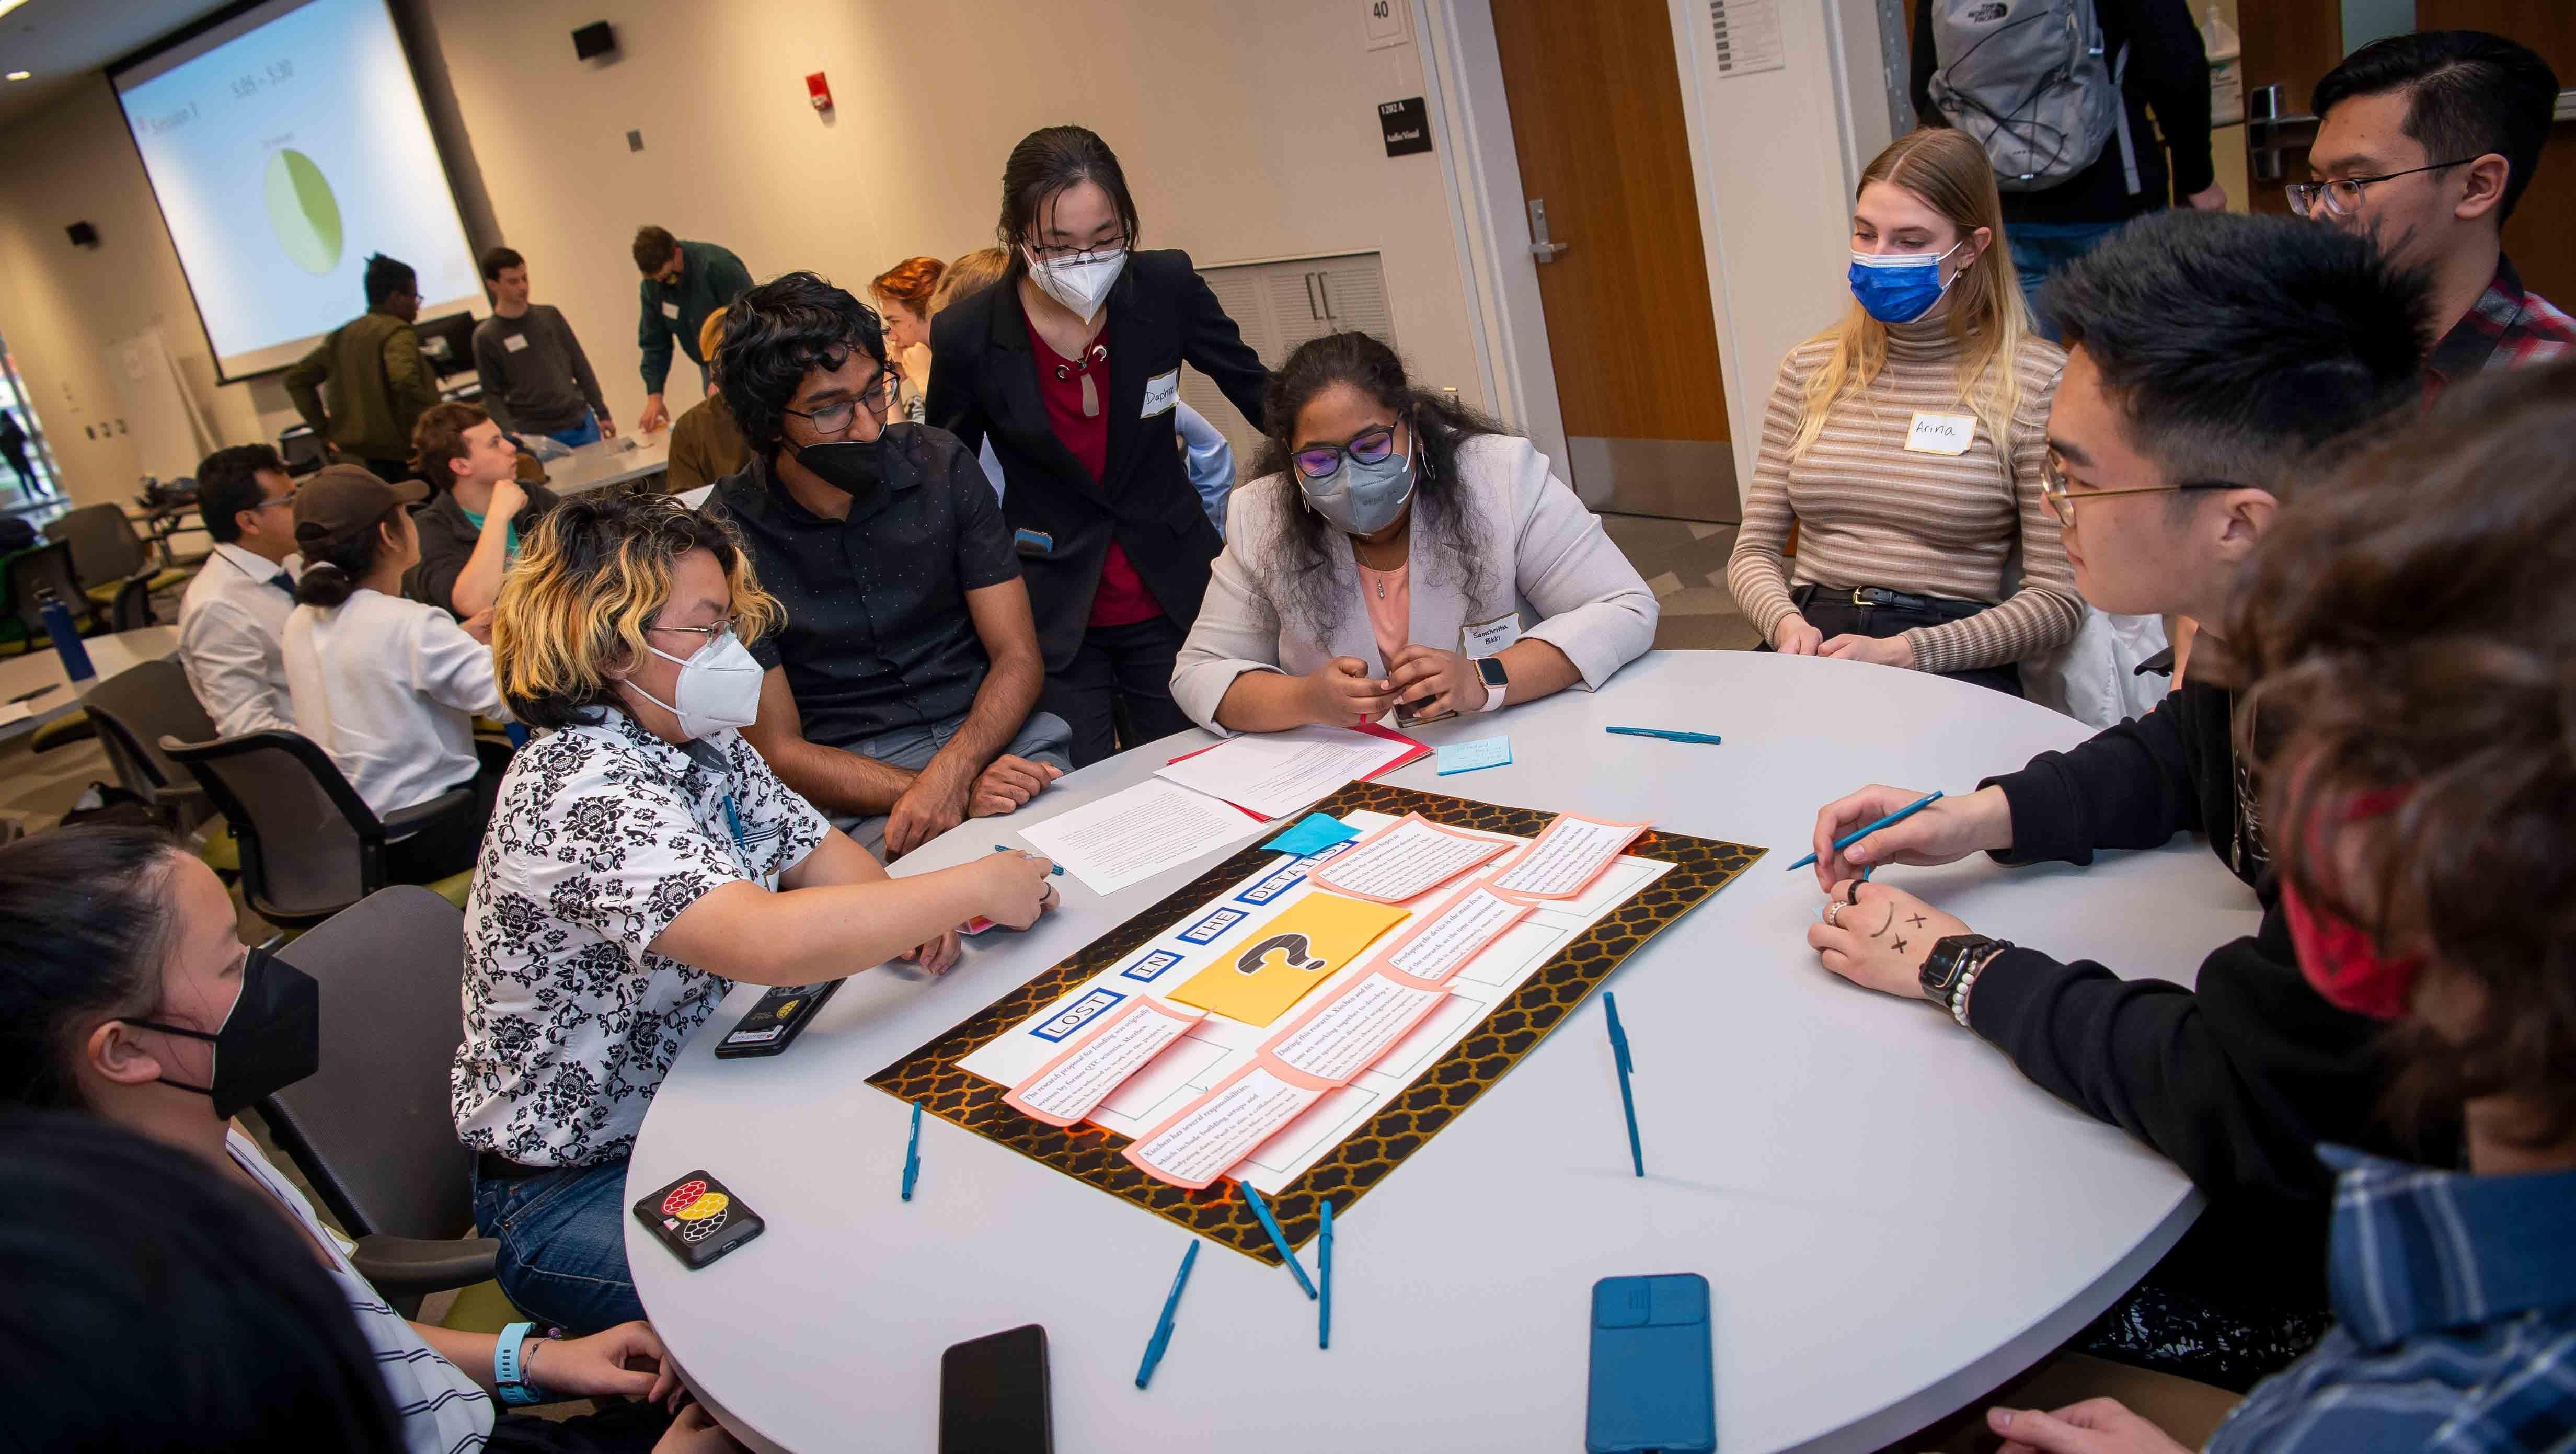 Students gathered around a table with a big boardgame-like artifact in the middle